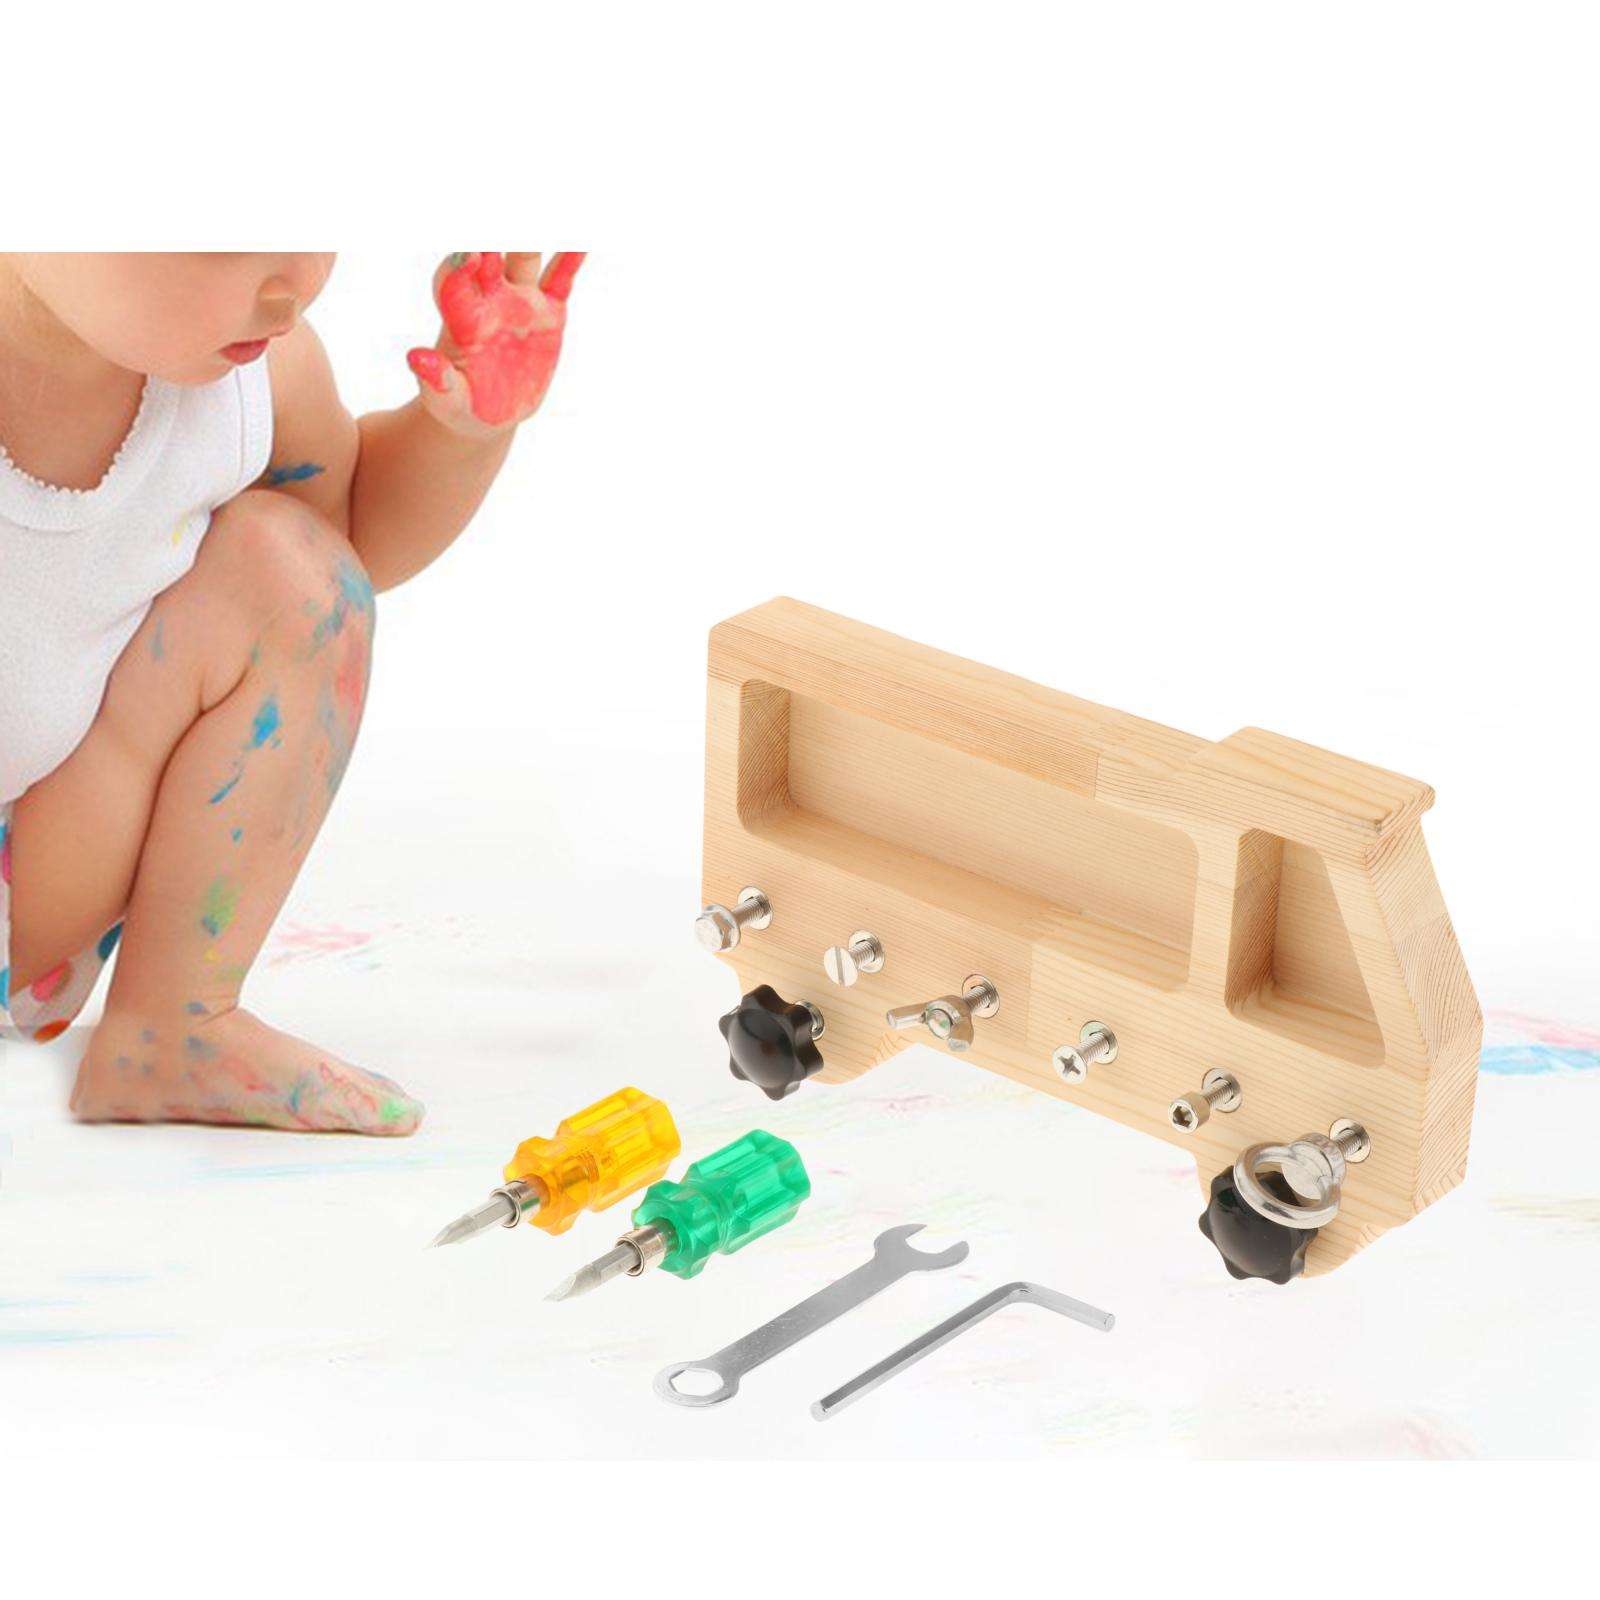 Wooden Screw Driver Board Play Set Pretend Play for Classroom Home School